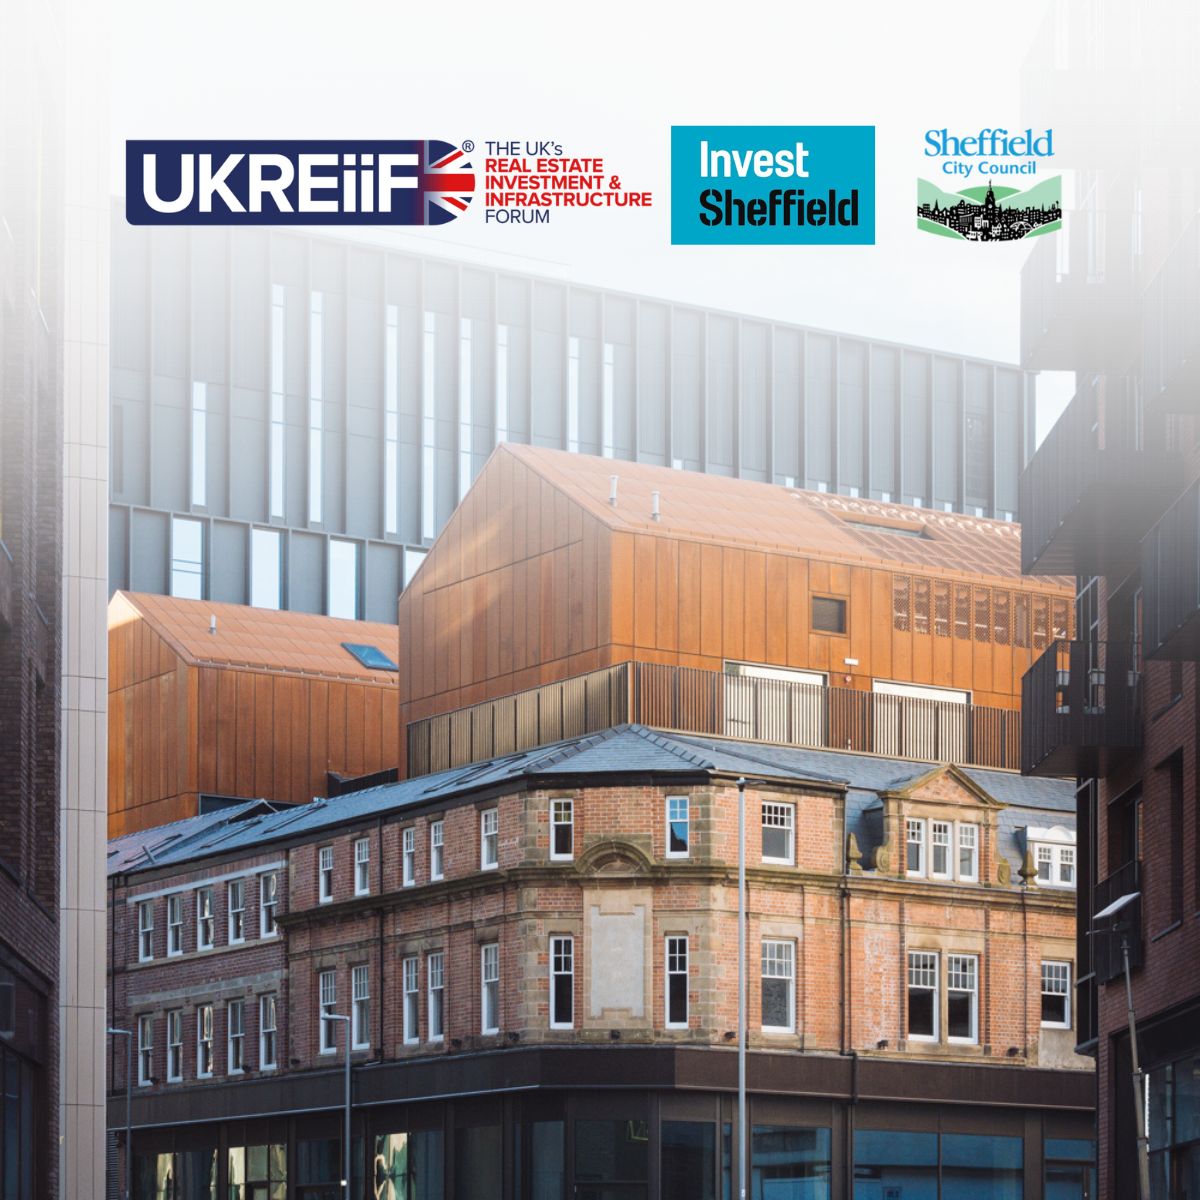 Next week, leaders are heading to UKREiiF 2024 (@UKREiiF), to showcase Sheffield as a global, green, and growing city that is delivering dynamic spaces to work, live, and play. Learn more about Sheffield’s panel here: sheffnews.com/news/leaders-t…